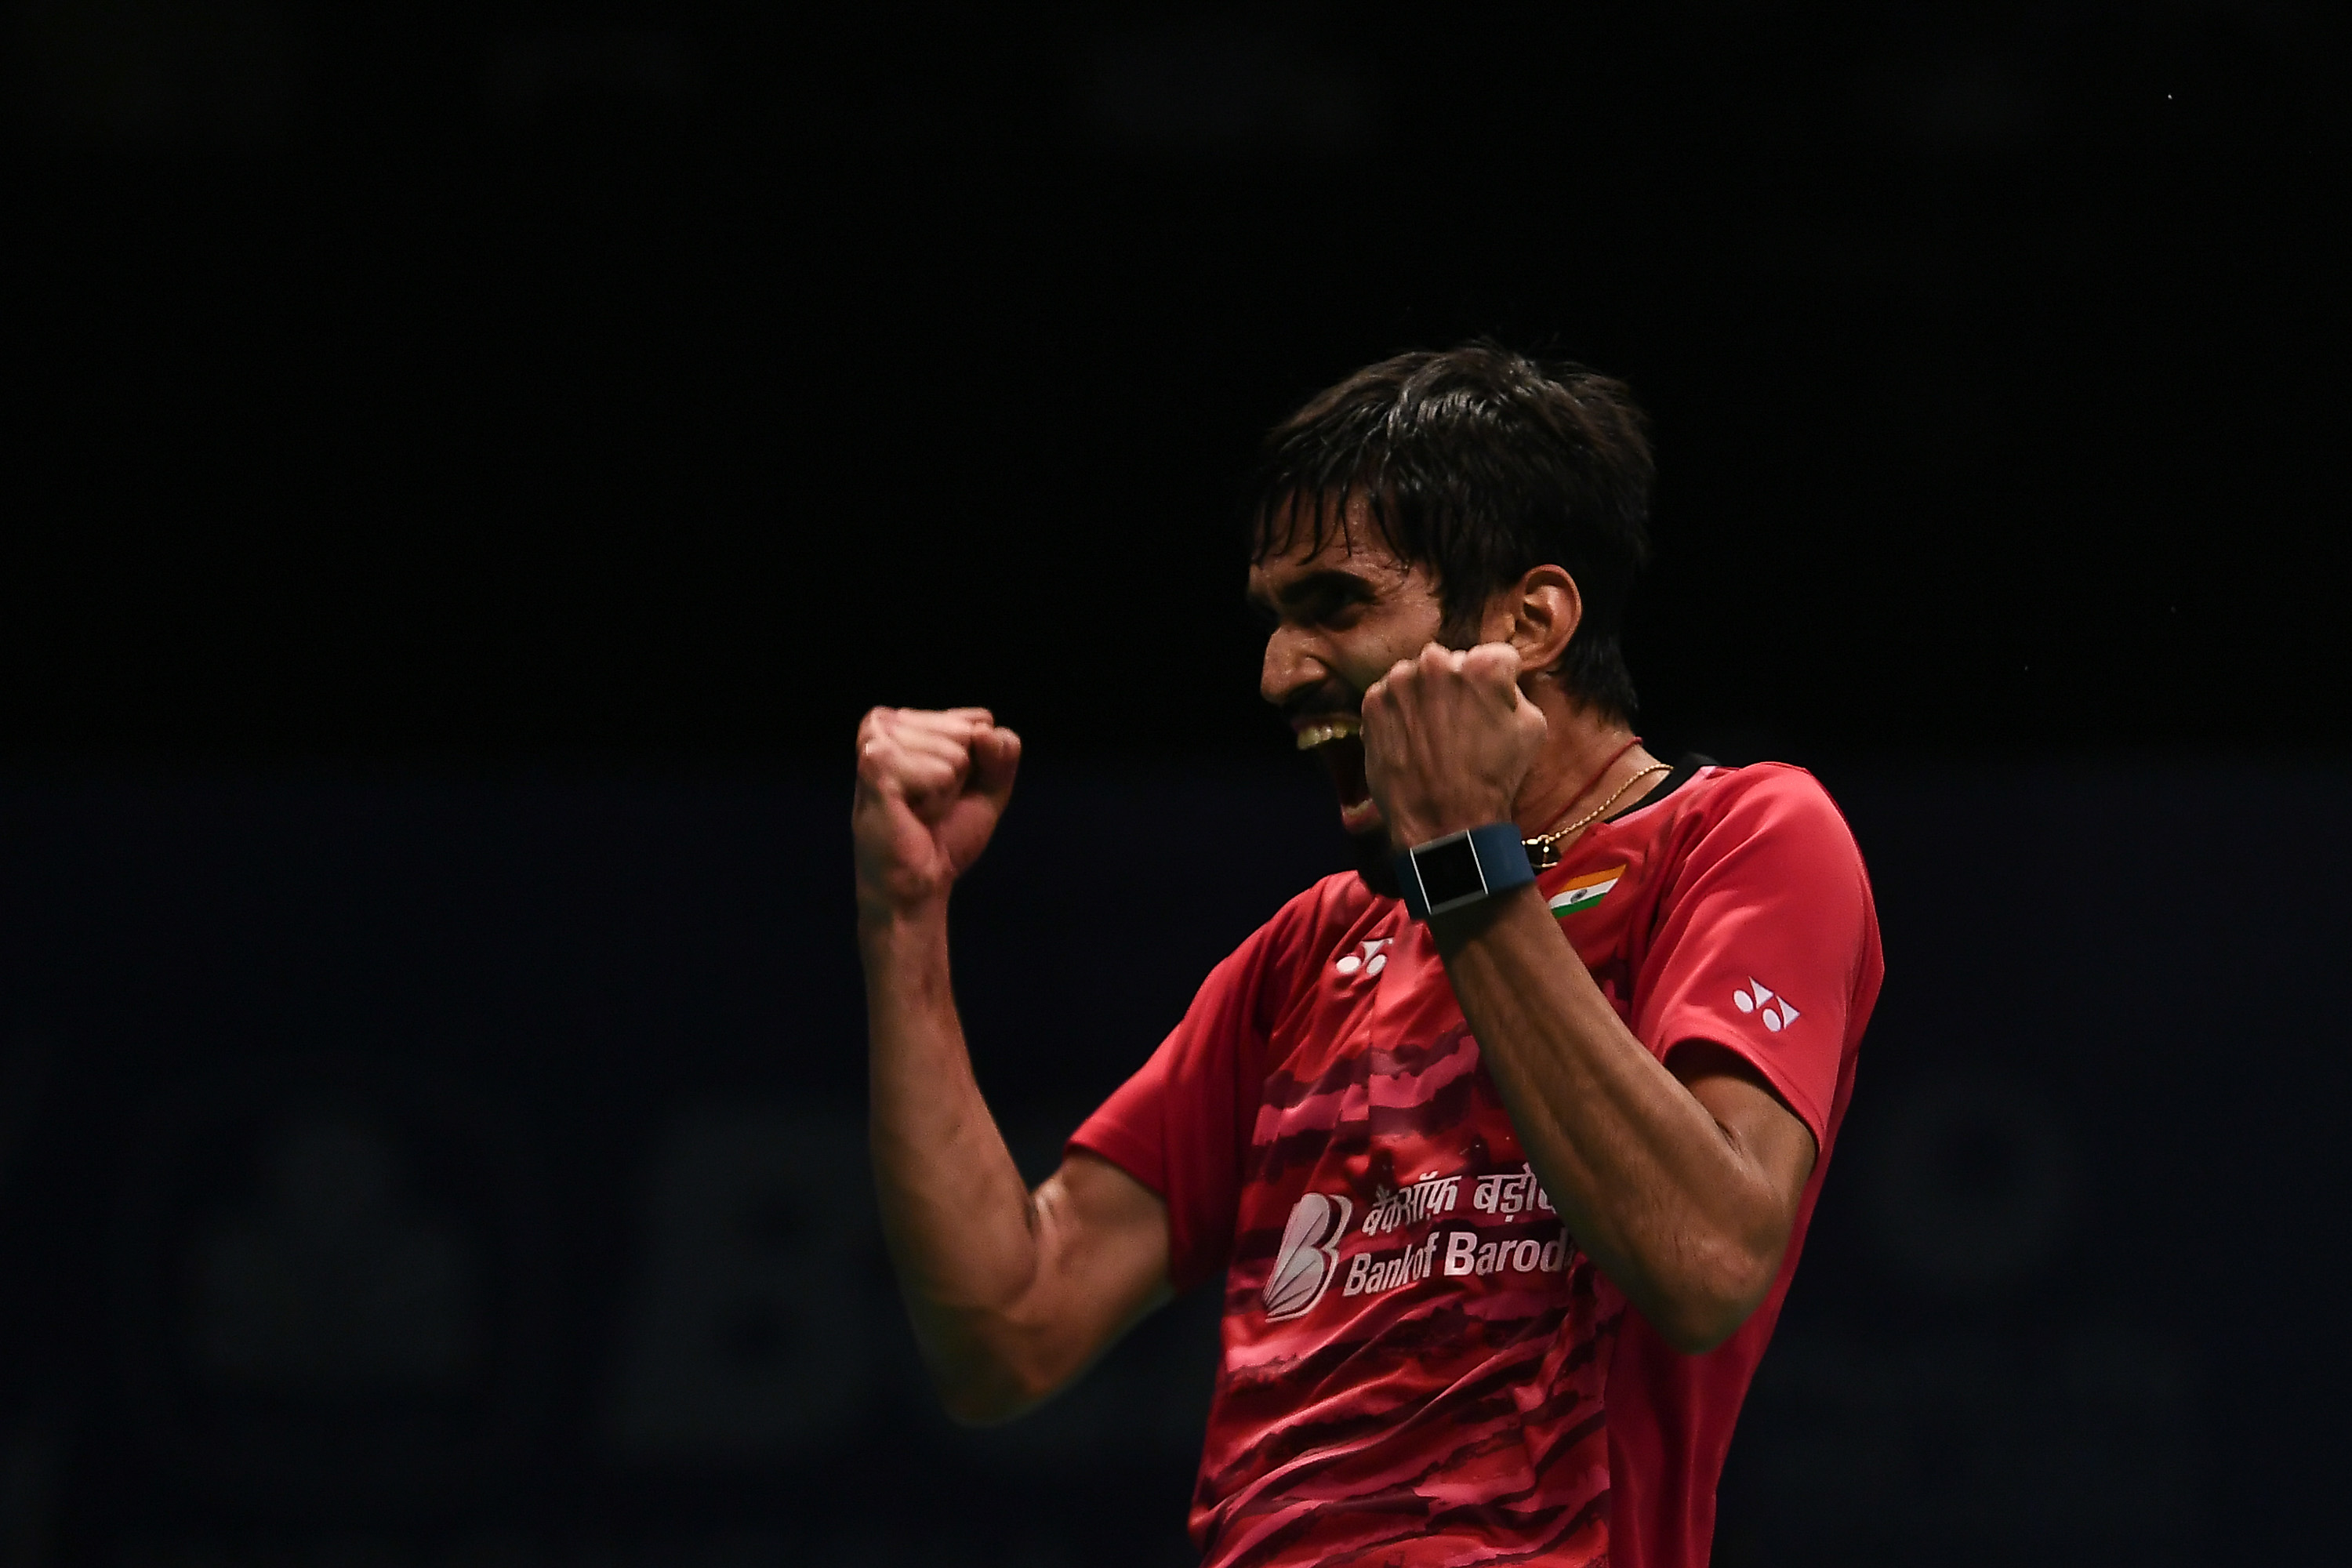 Why India will certainly win a medal at BWF World Championships this year